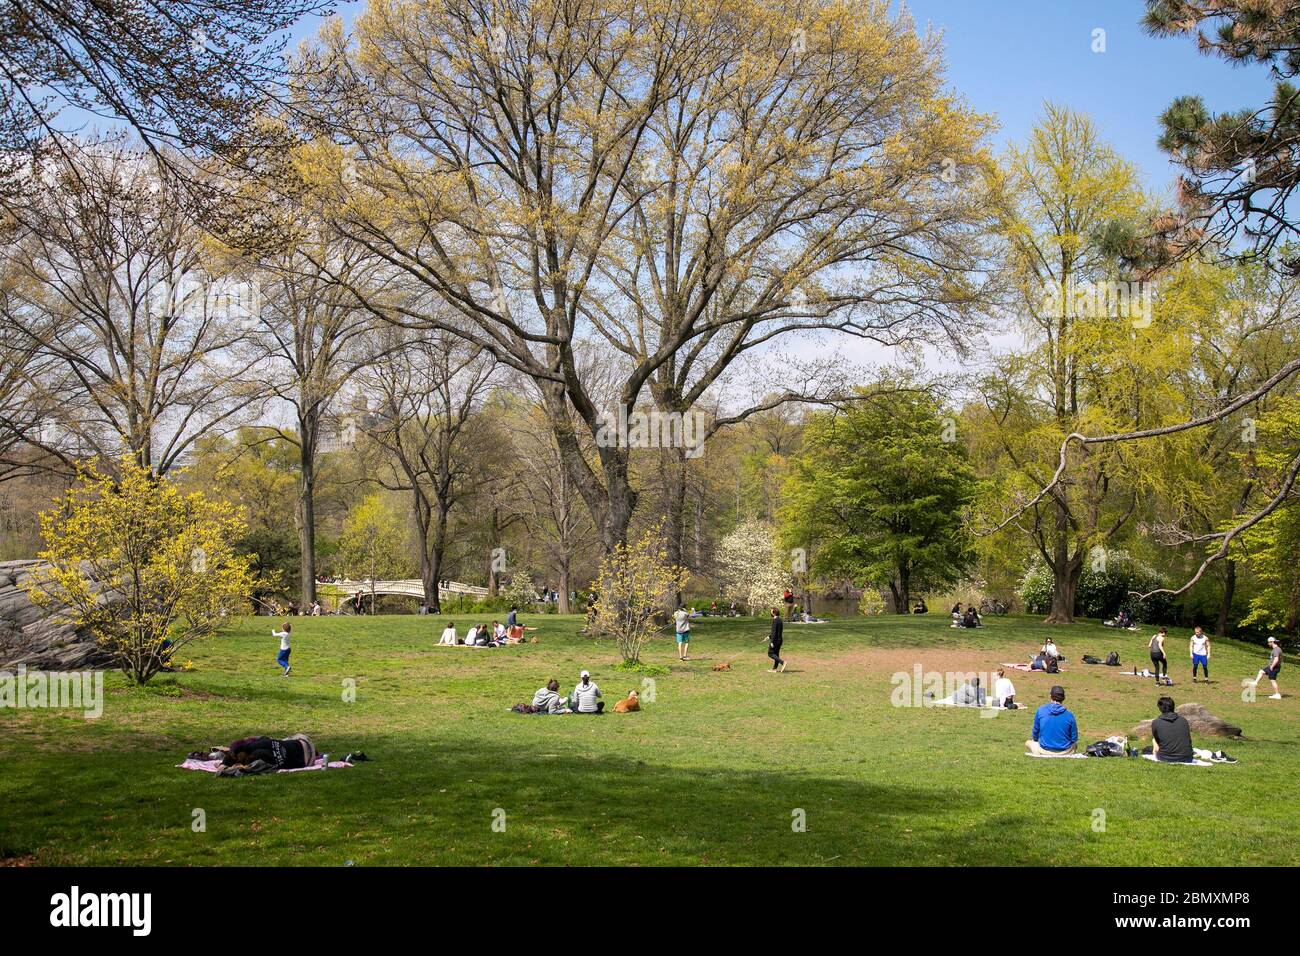 People enjoying spring in Central Park, New York City. Stock Photo